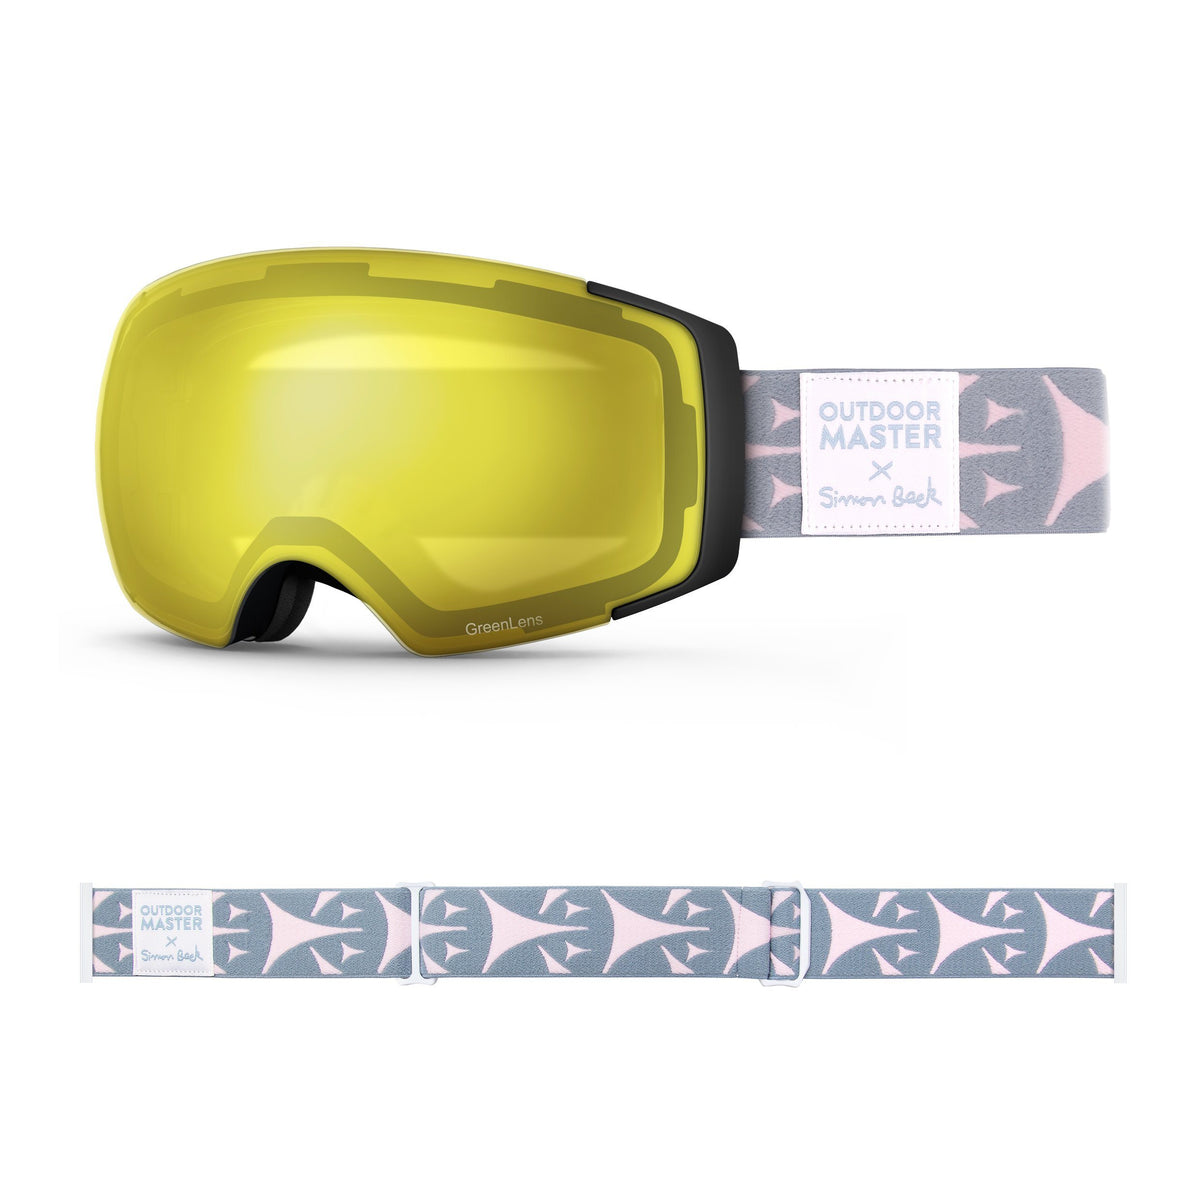 OutdoorMaster x Simon Beck Ski Goggles Pro Series - Snowshoeing Art Limited Edition OutdoorMaster GreenLens VLT 75% TAC Yellow Lens Polarized Bouncy Triangles